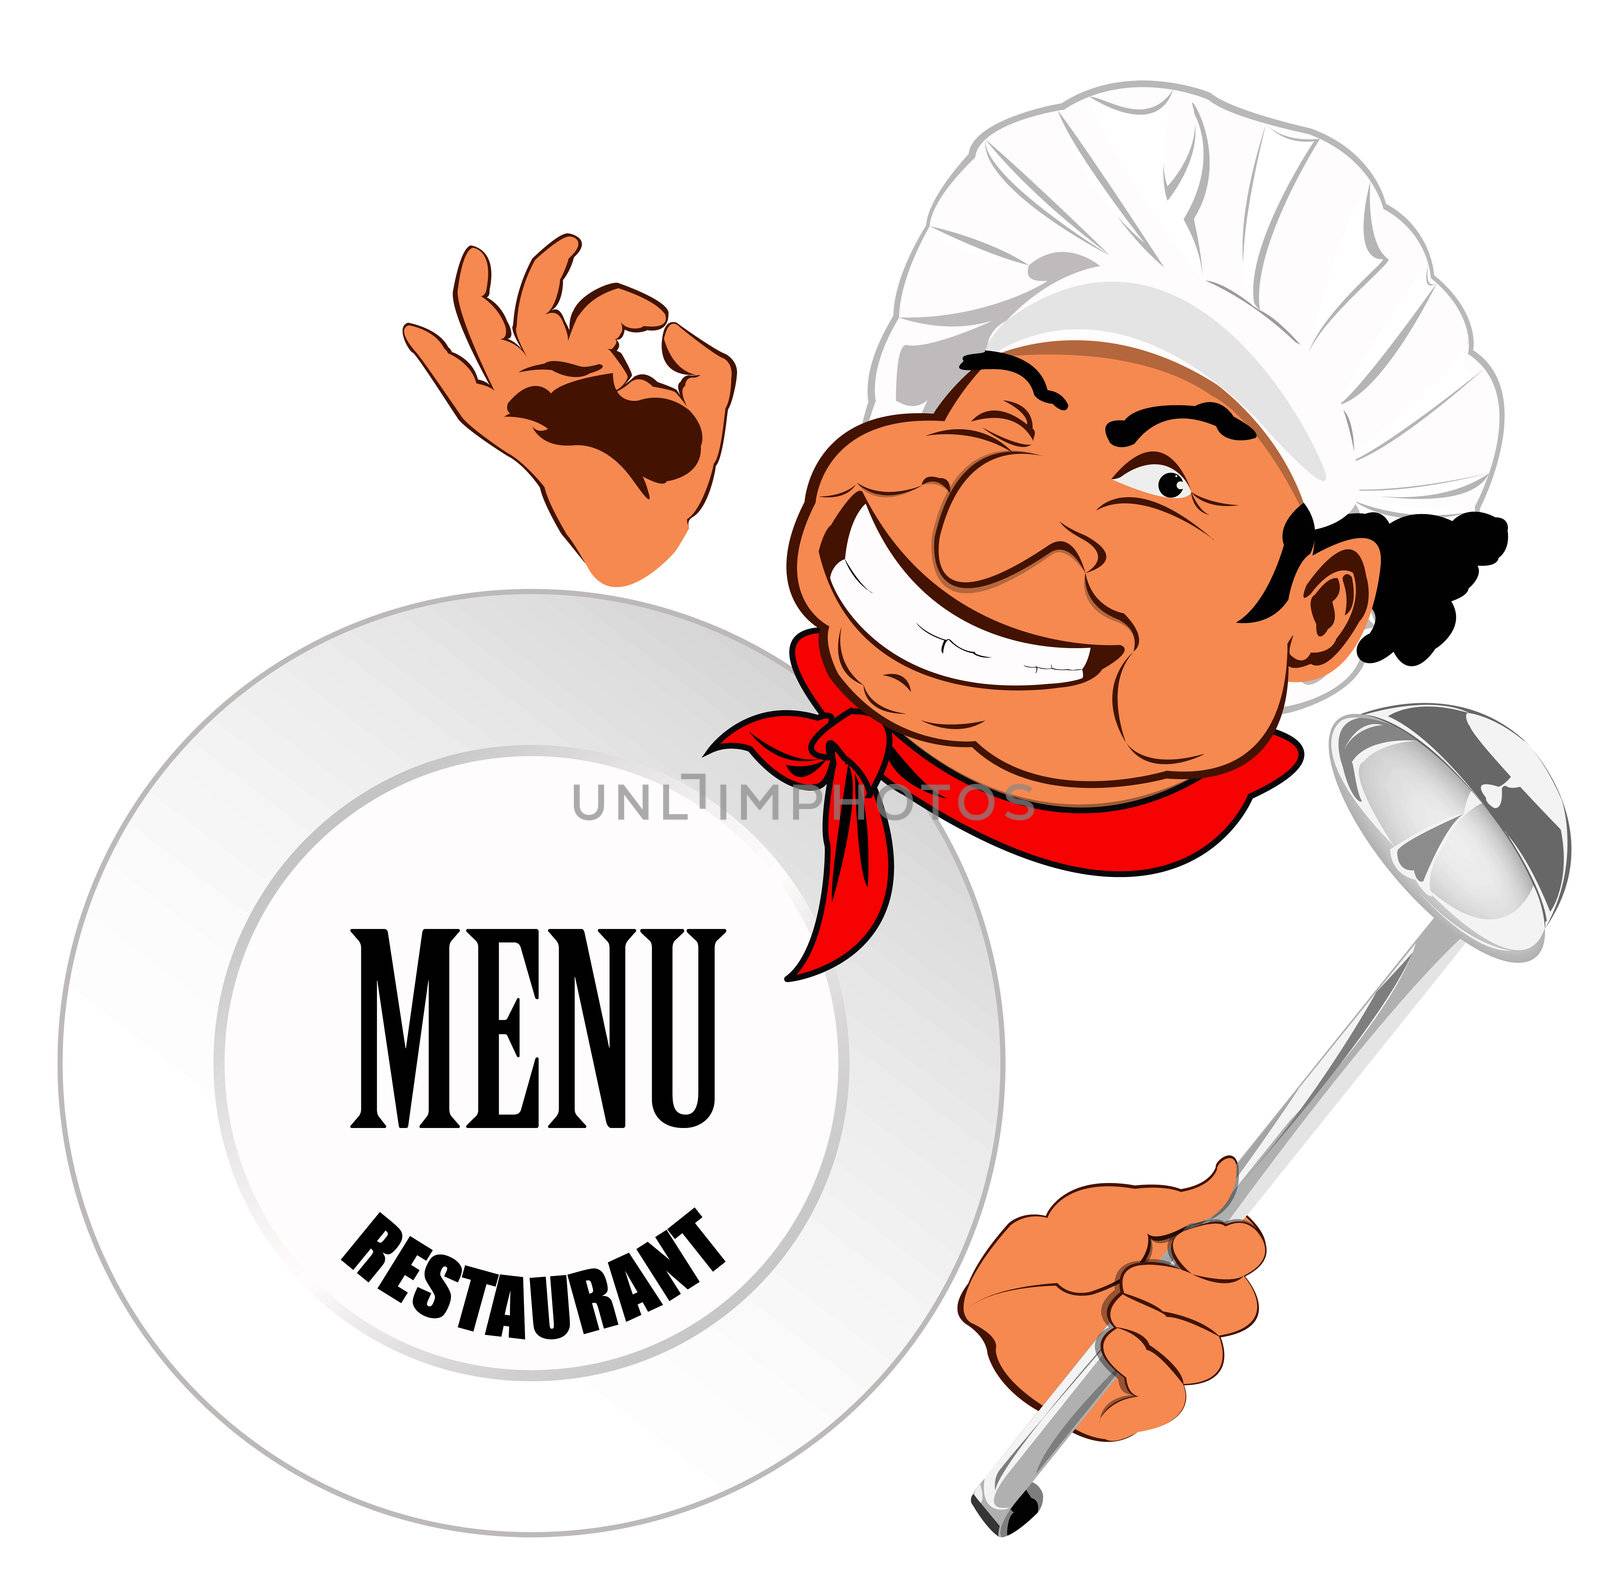 Menu for Gourmet from Chef Restaurant business by sergey150770SV